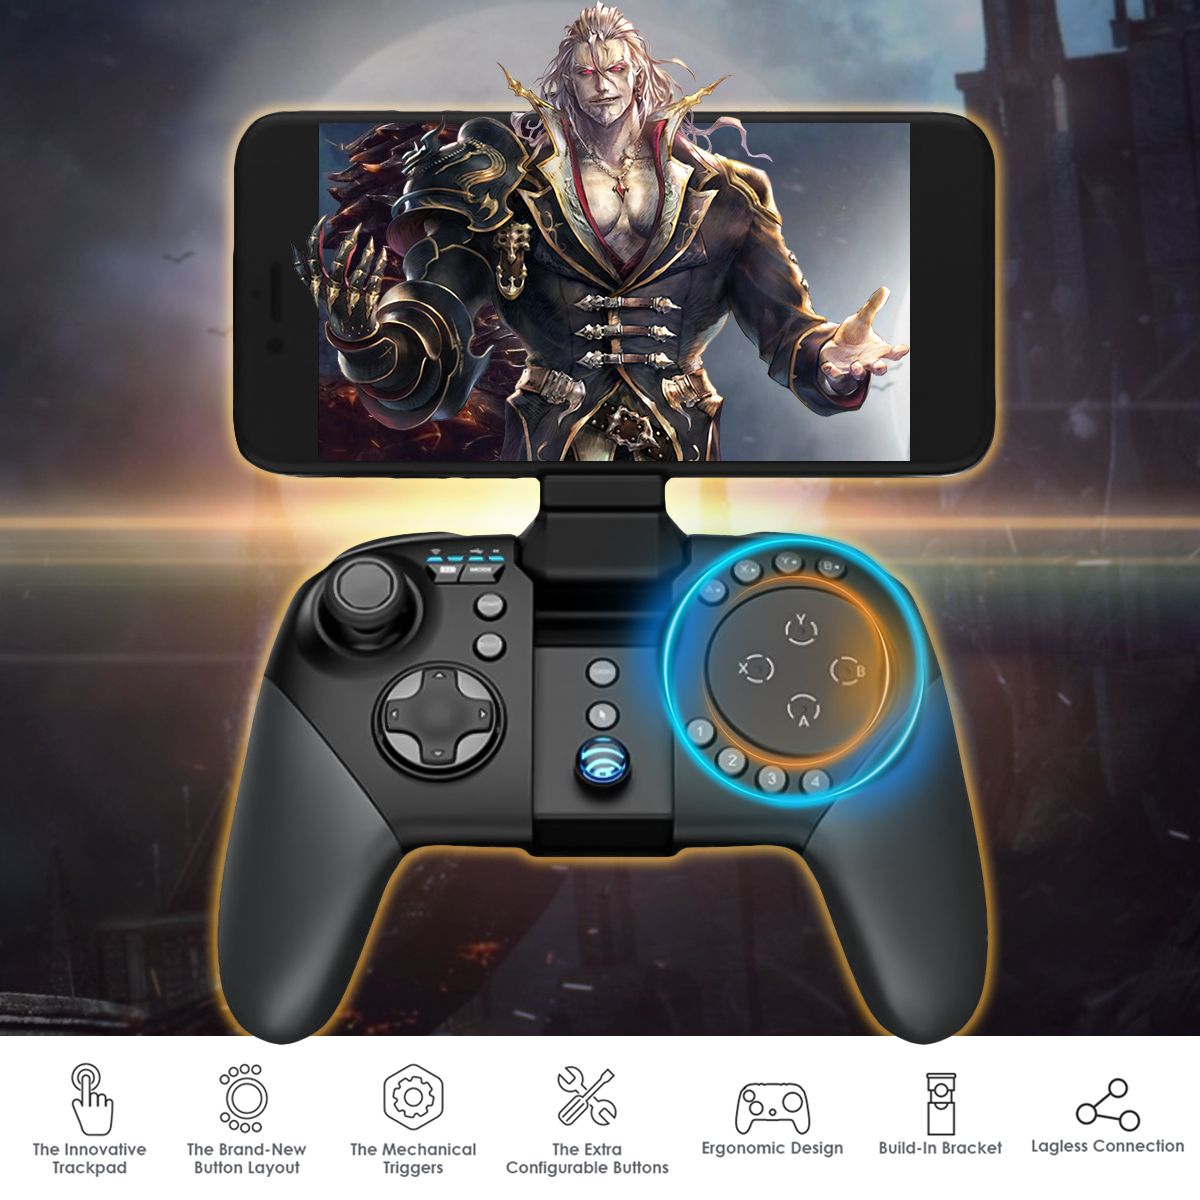 2Pcs-Gamesir-G5-bluetooth-Wireless-Trackpad-Touchpad-Gamepad-Mouse-Keyboard-Converter-with-Phone-Cli-1345710